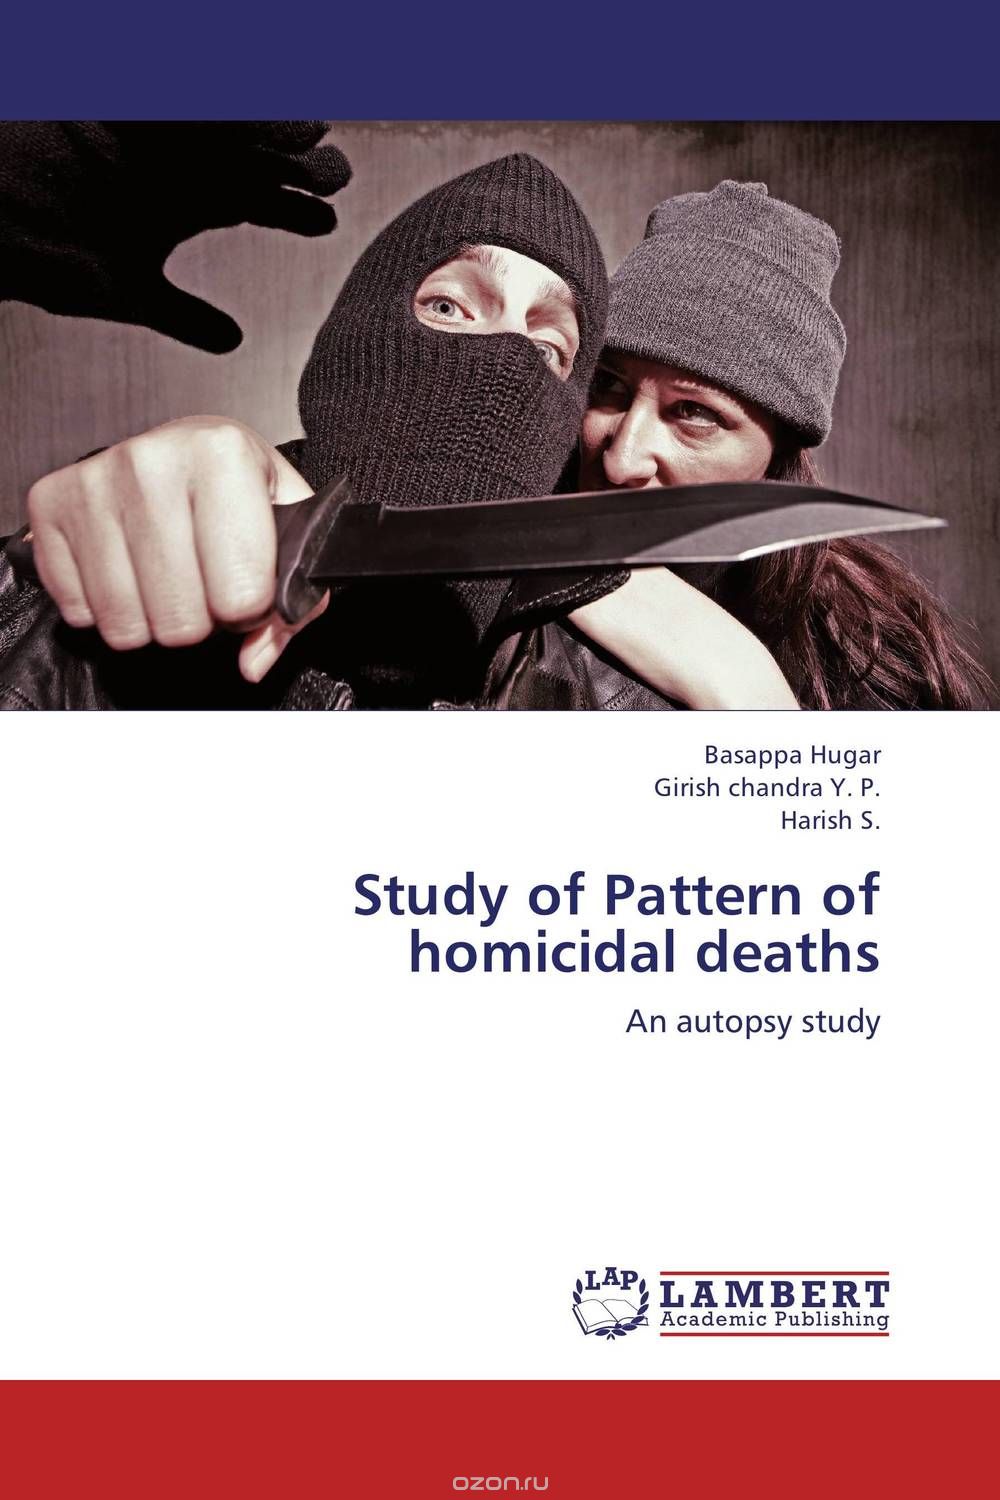 Study of Pattern of homicidal deaths